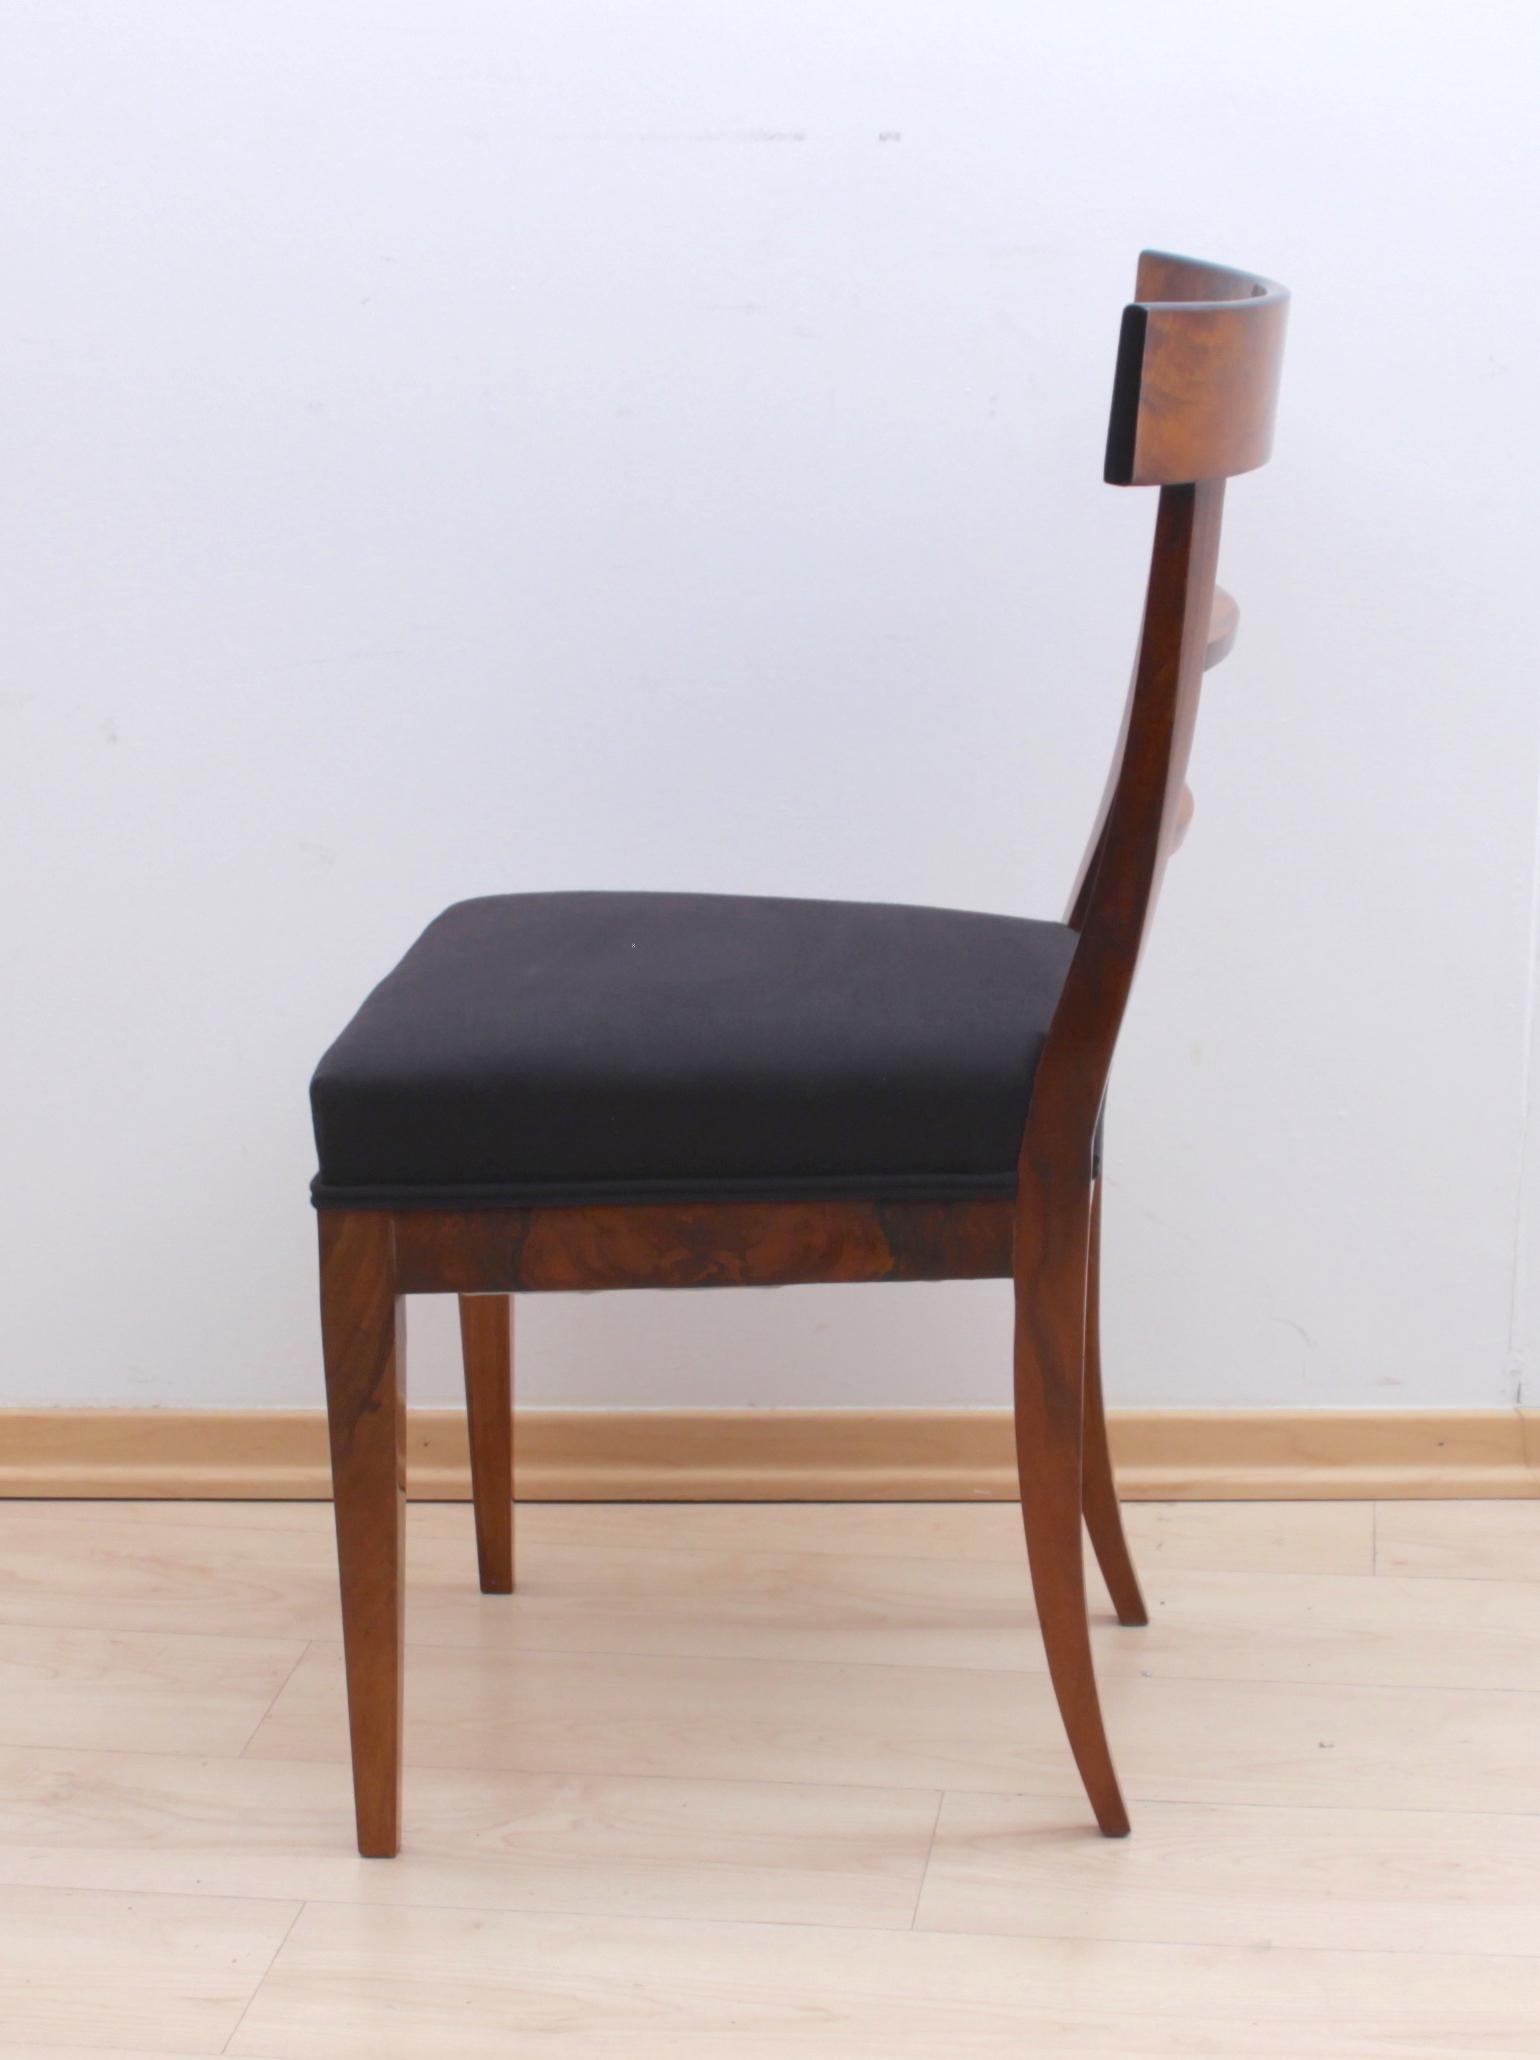 Plain and very elegant Biedermeier chair from South Germany, circa 1820.
Book-matched veneered with walnut of beautiful grain. Two crossbars in the back.
Elegant conical 4-edged legs.
Classic black new upholstery cotton fabric surrounded by